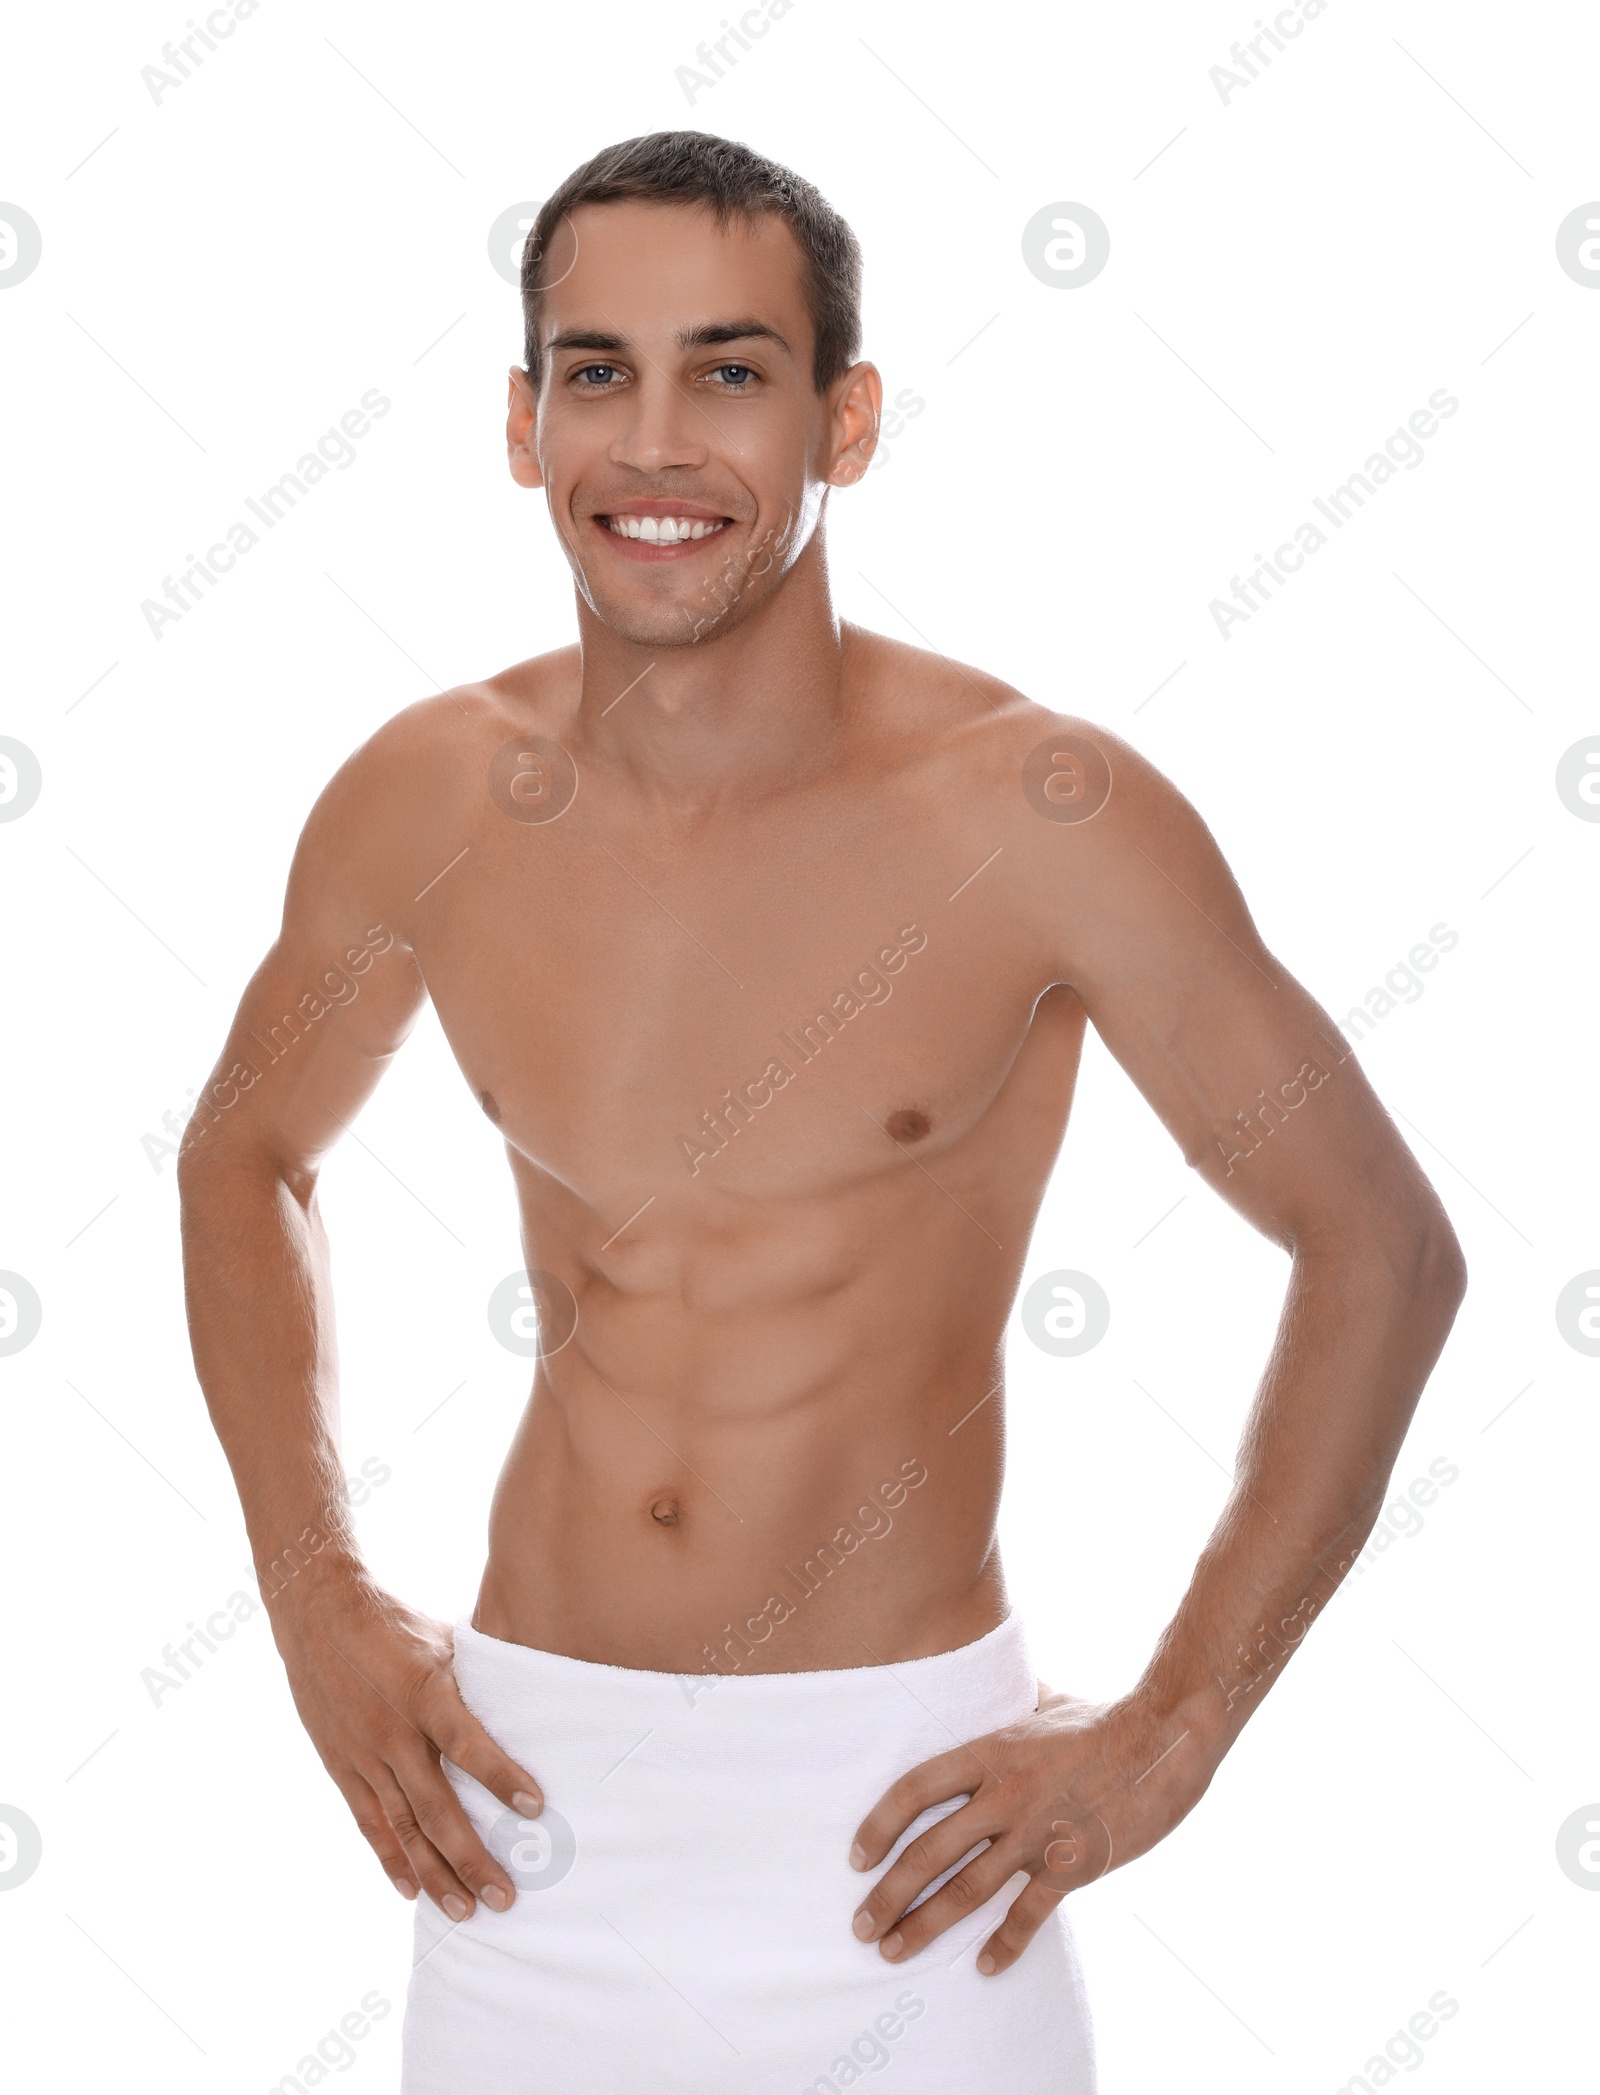 Photo of Handsome shirtless man with slim body and towel wrapped around his hips isolated on white